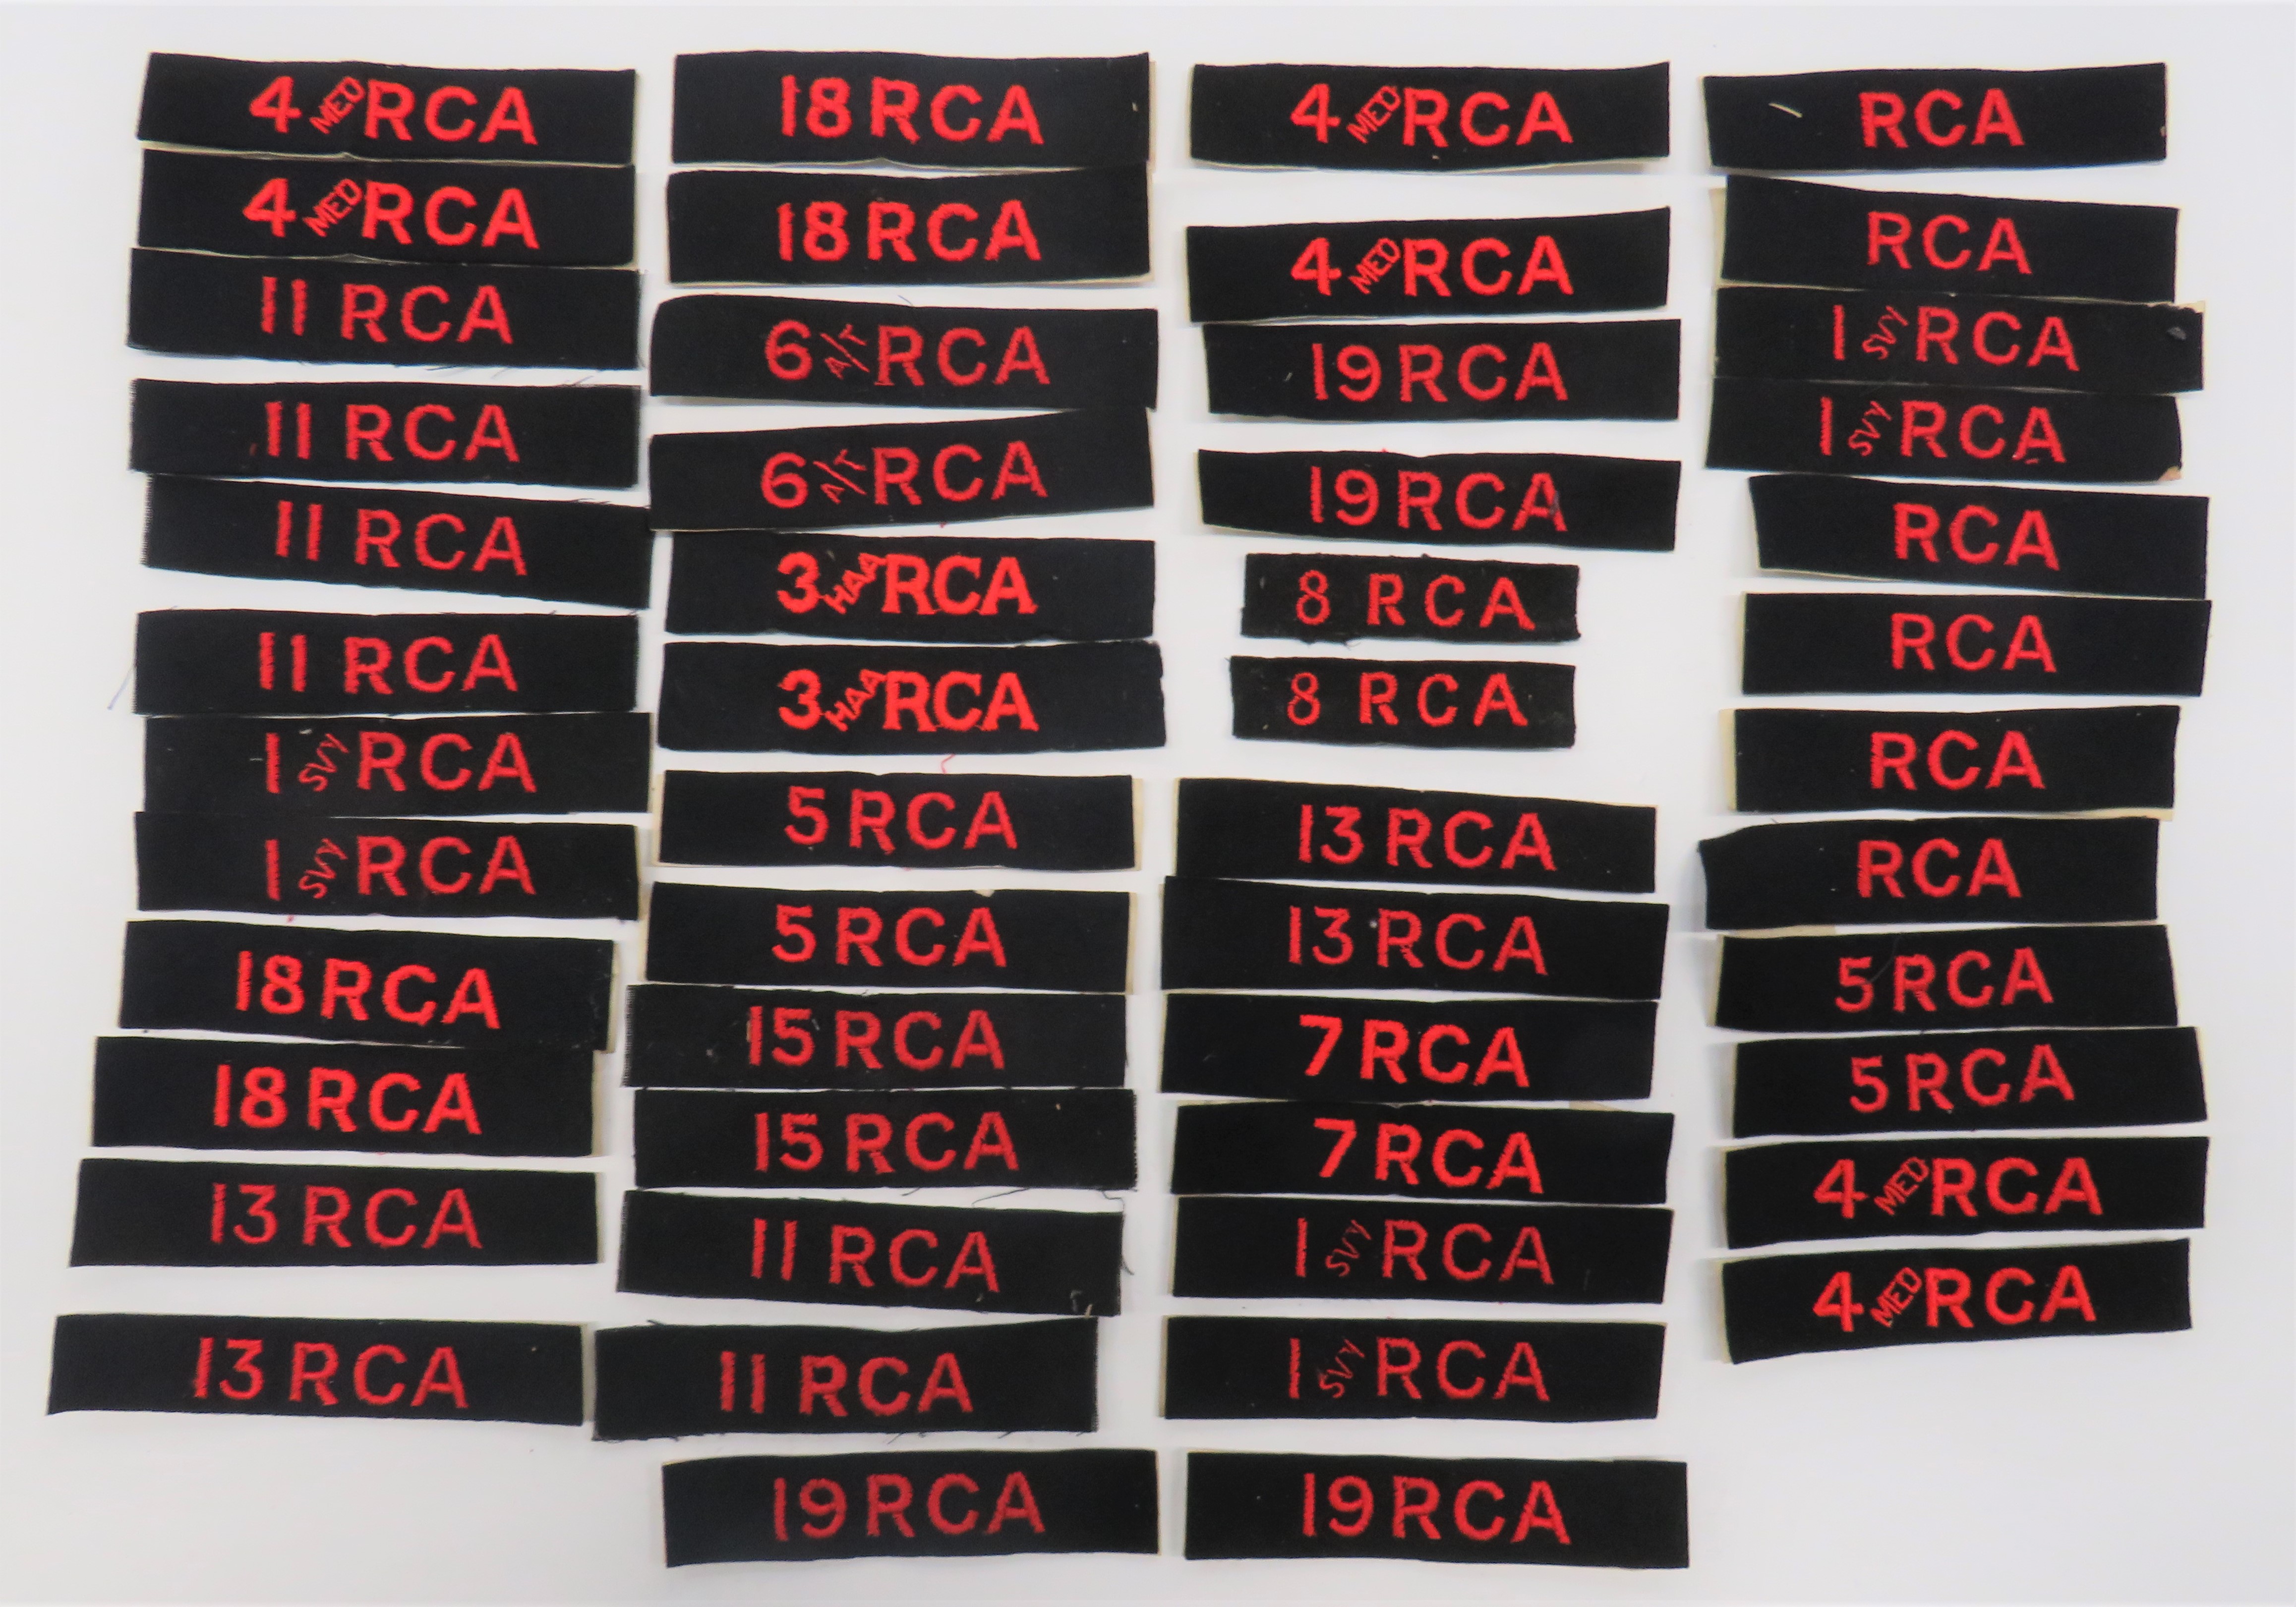 Royal Canadian Artillery Embroidery Shoulder Title Pairs pairs include RCA ... 7 RCA ... 18